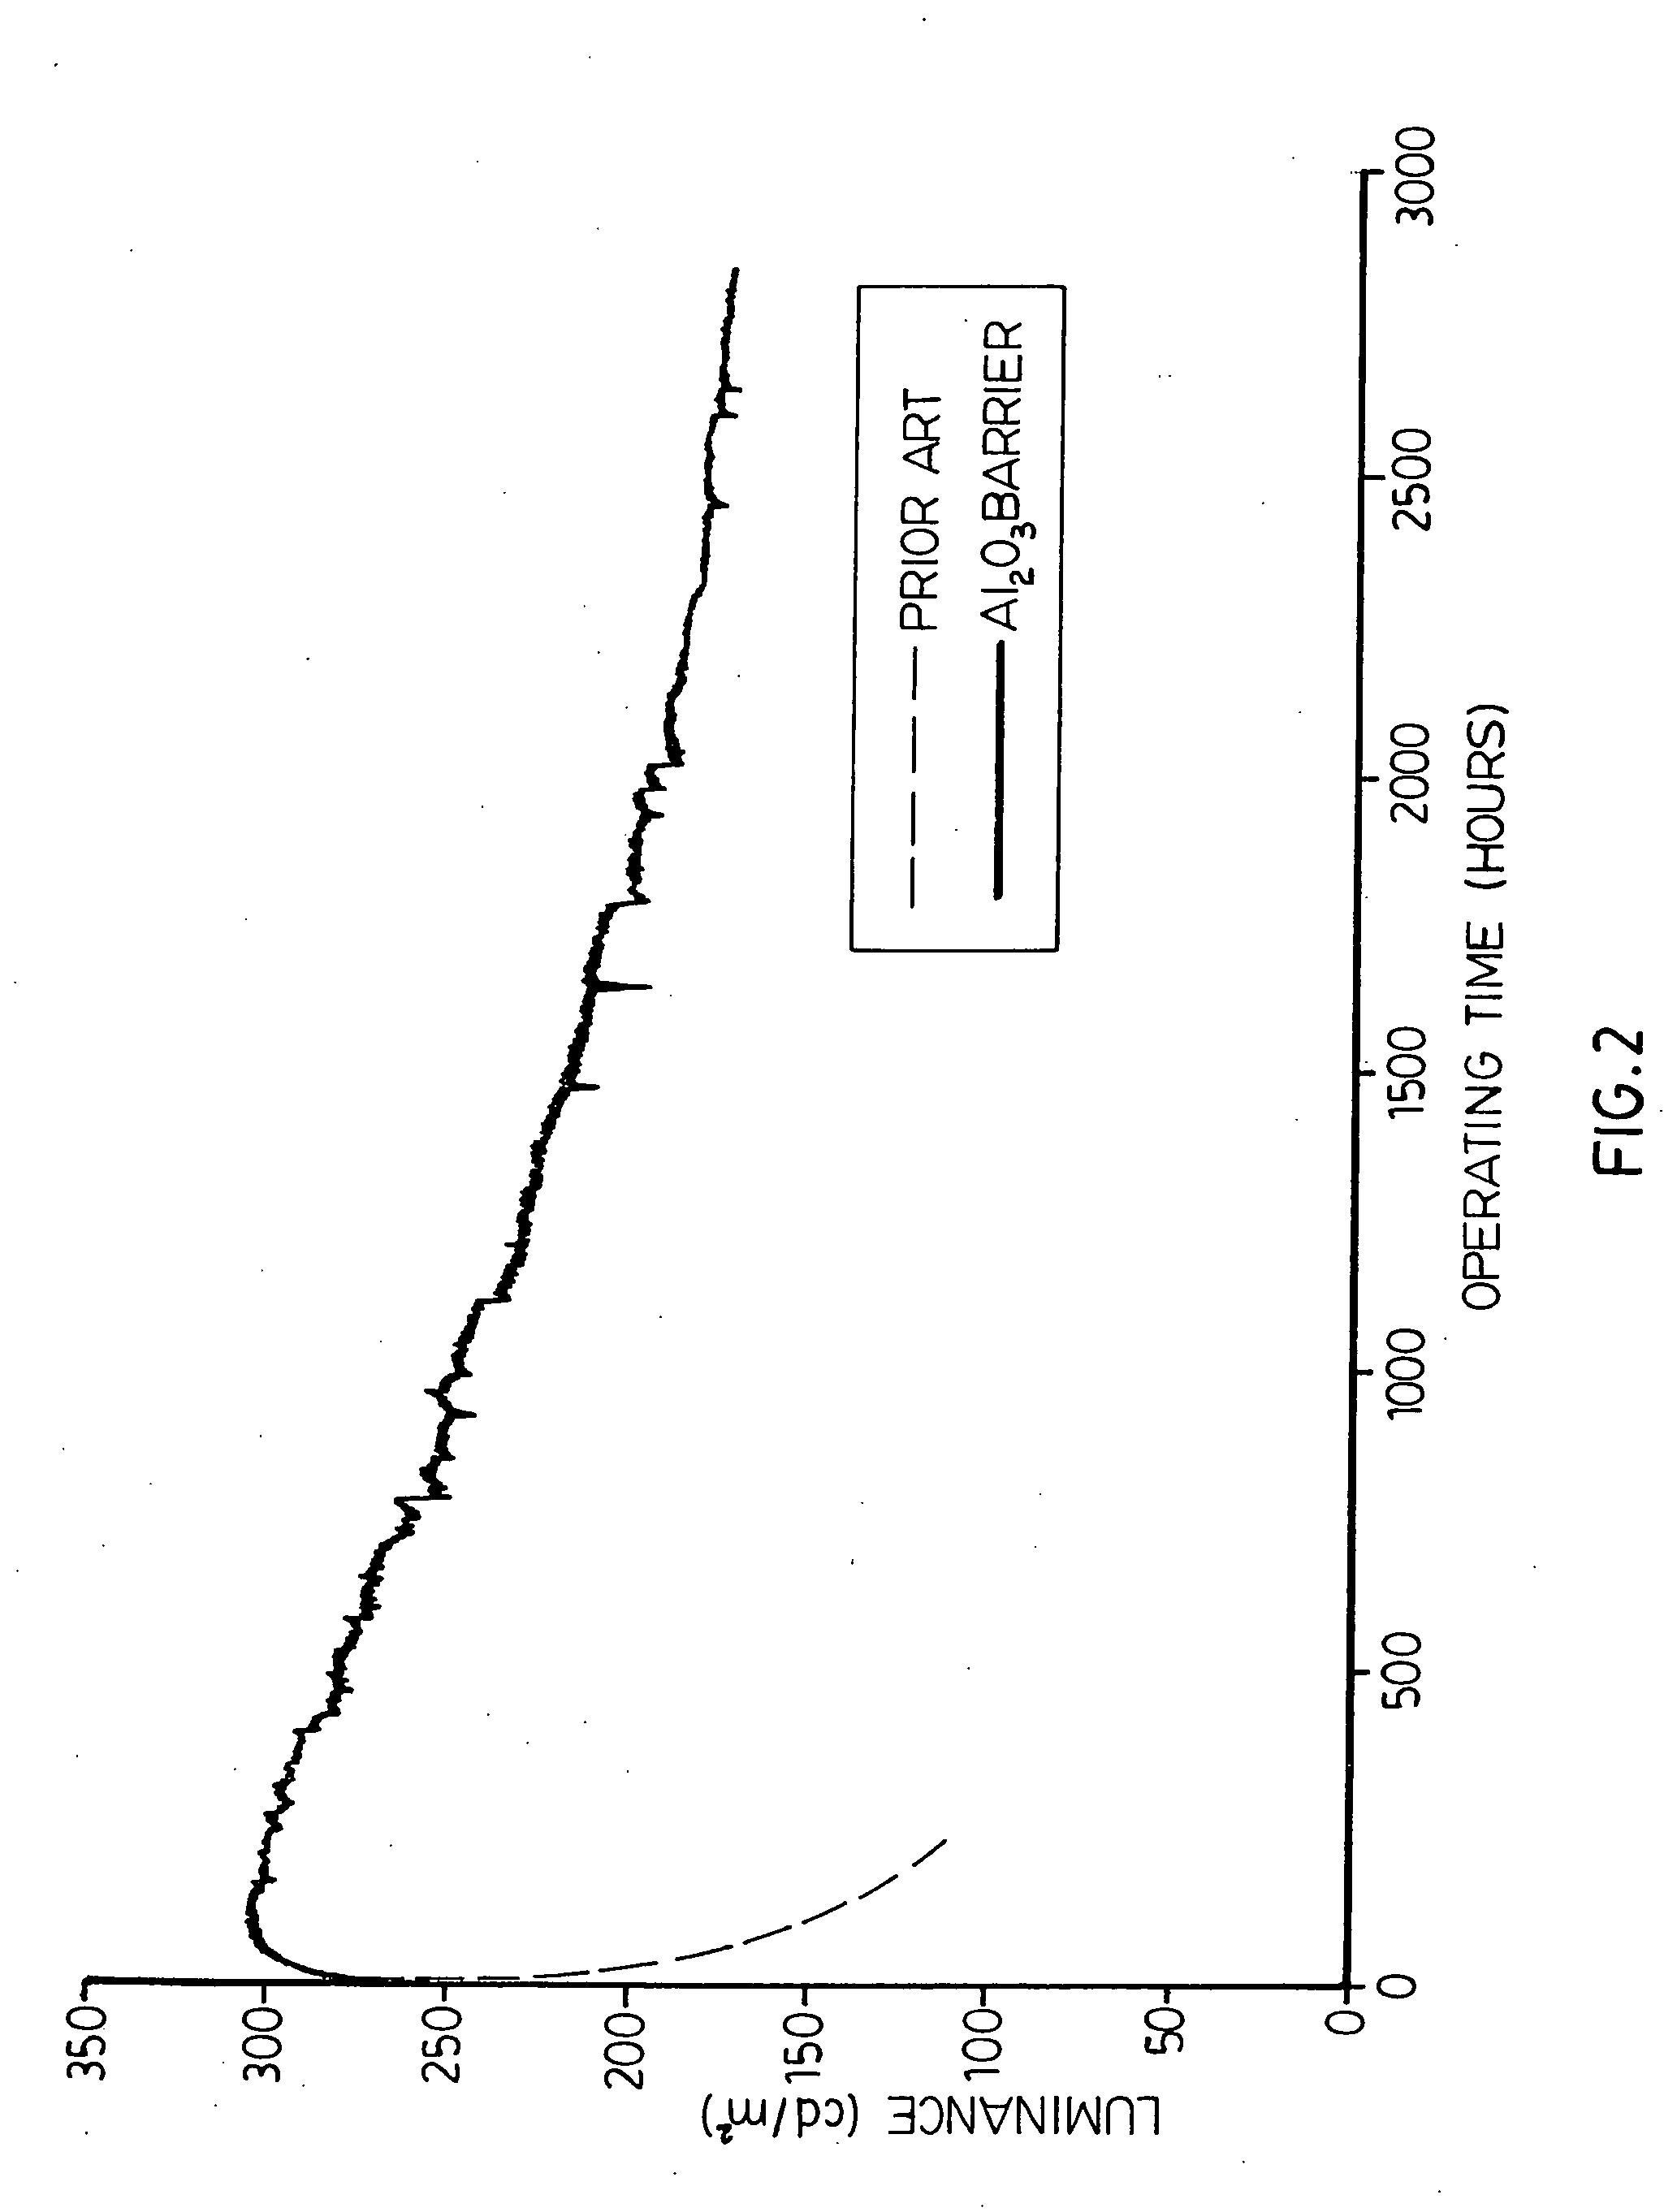 Aluminum oxide and aluminum oxynitride layers for use with phosphors for electroluminescent displays